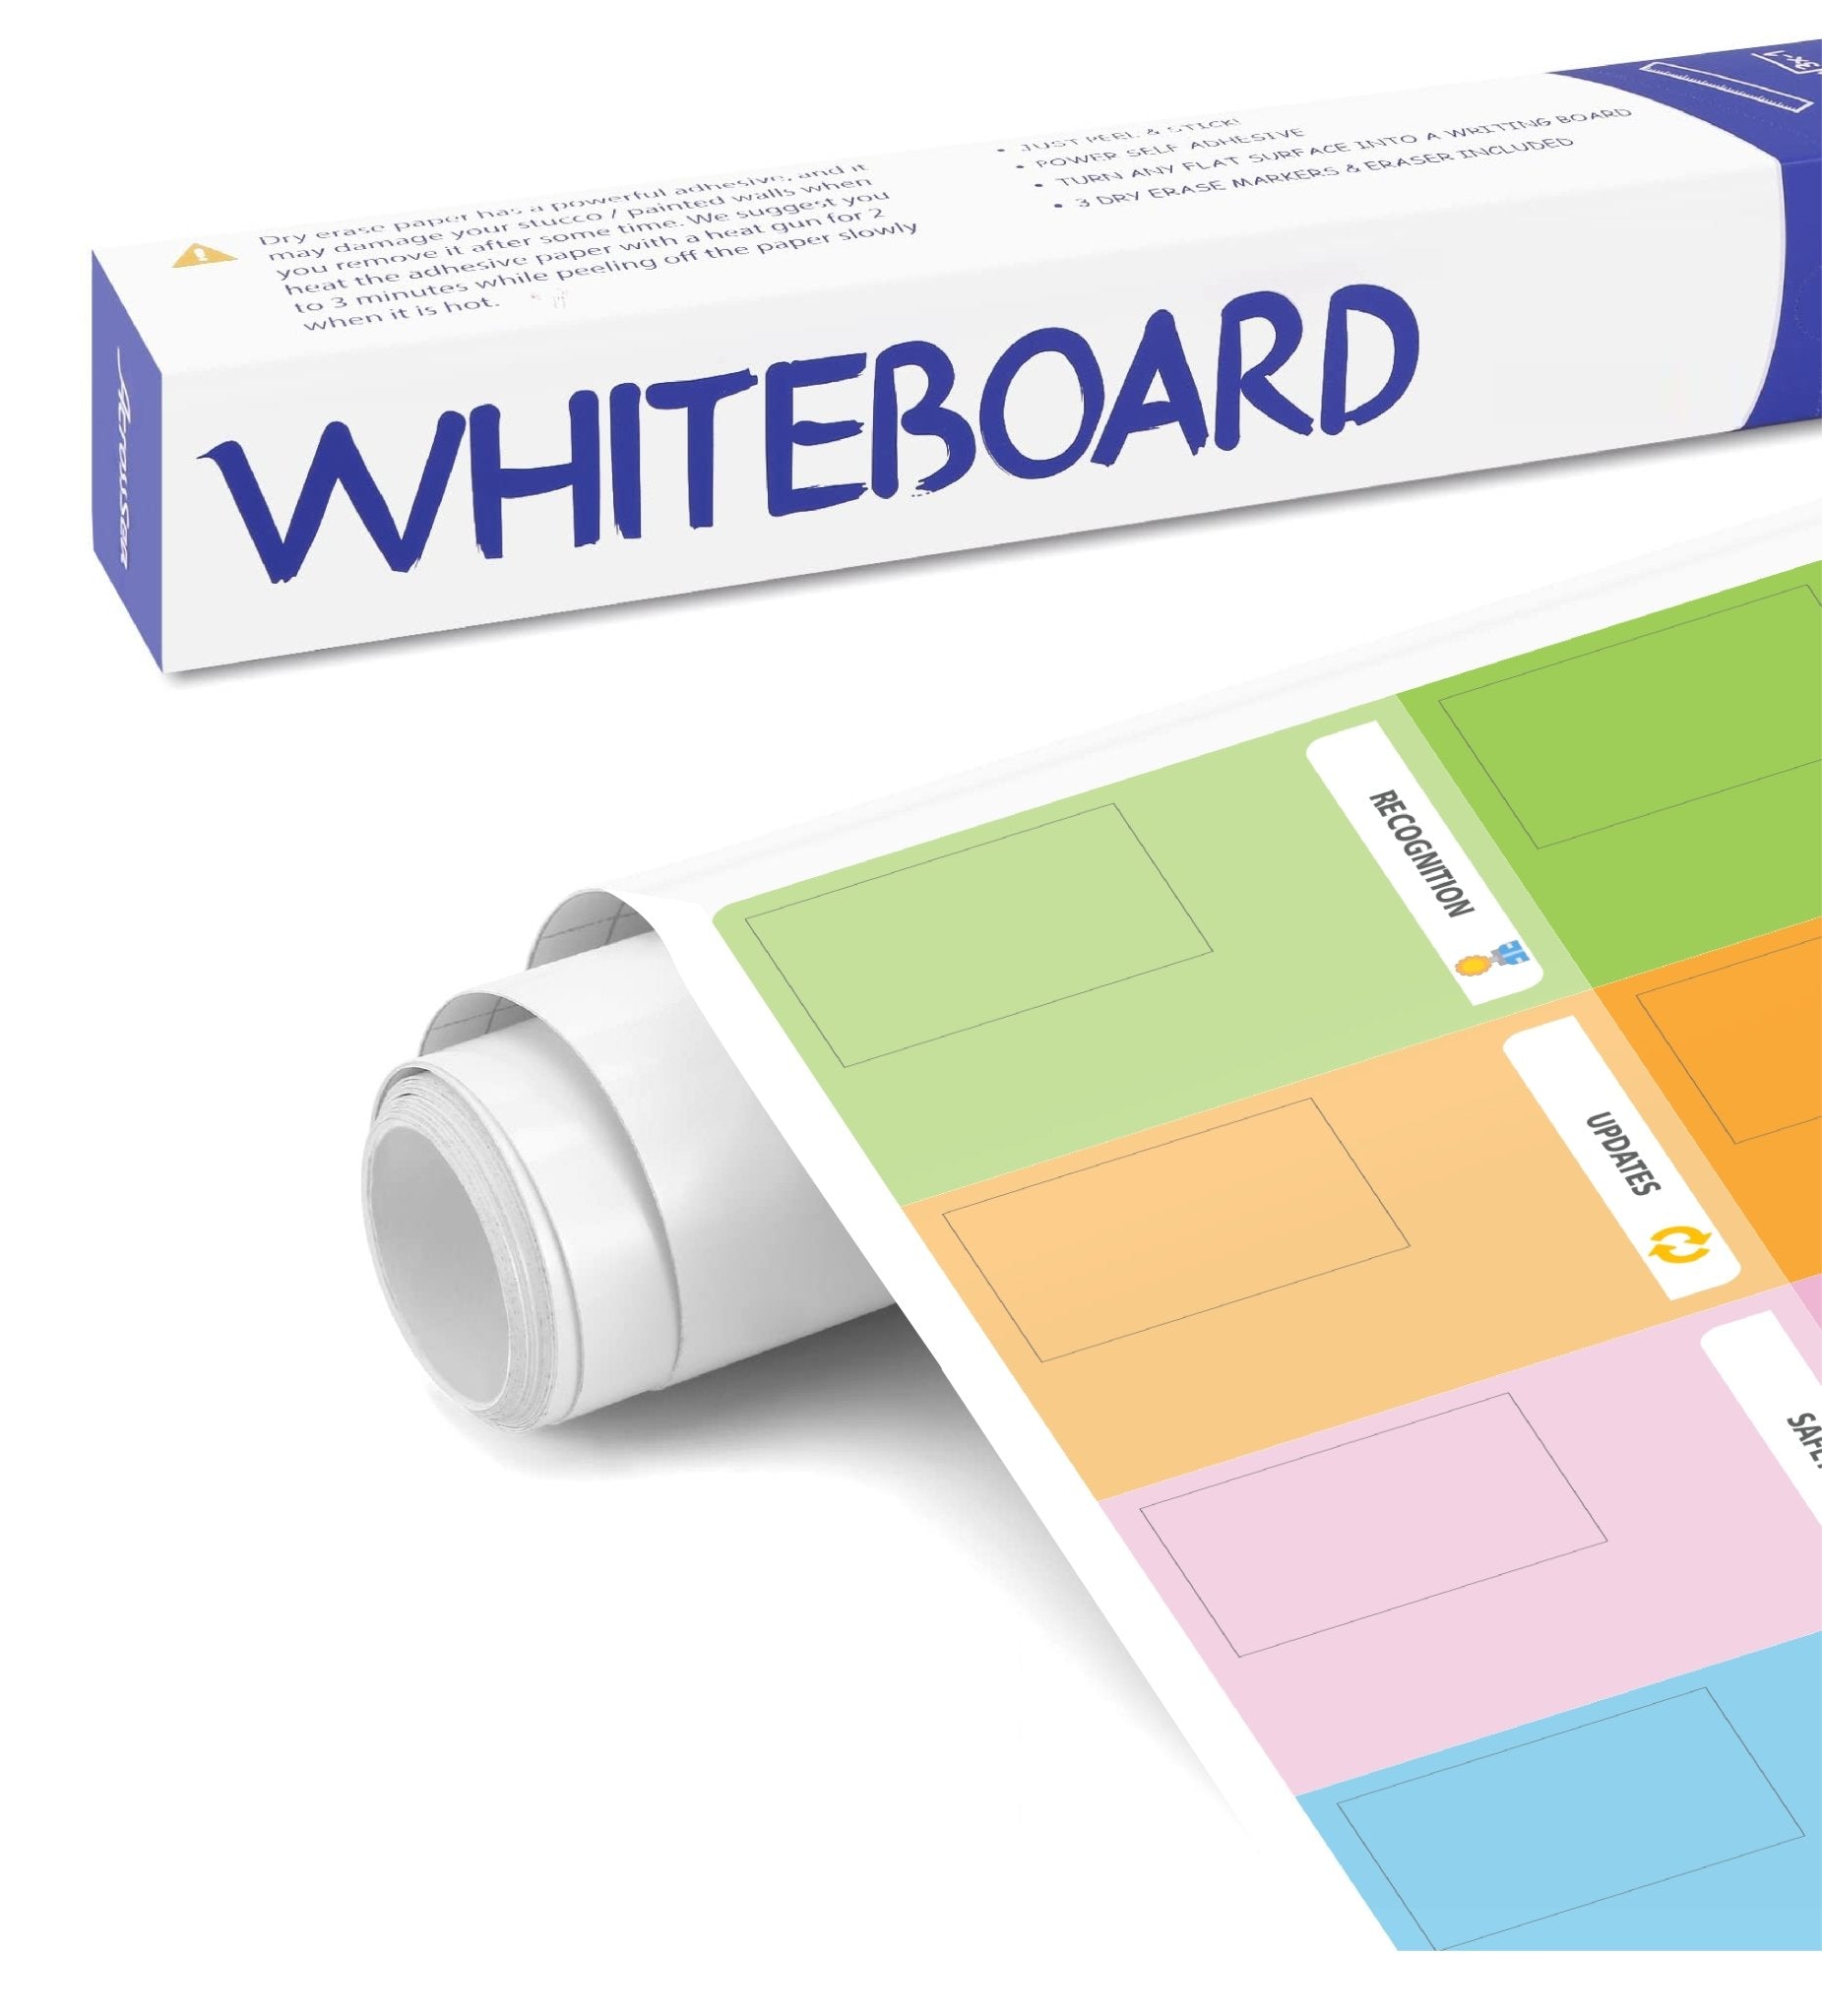 Self Adhesive Dry Erase Whiteboard Vinyl Sticker Overlay (Custom Printed Graphic & Free Design Included) - CYANvisuals